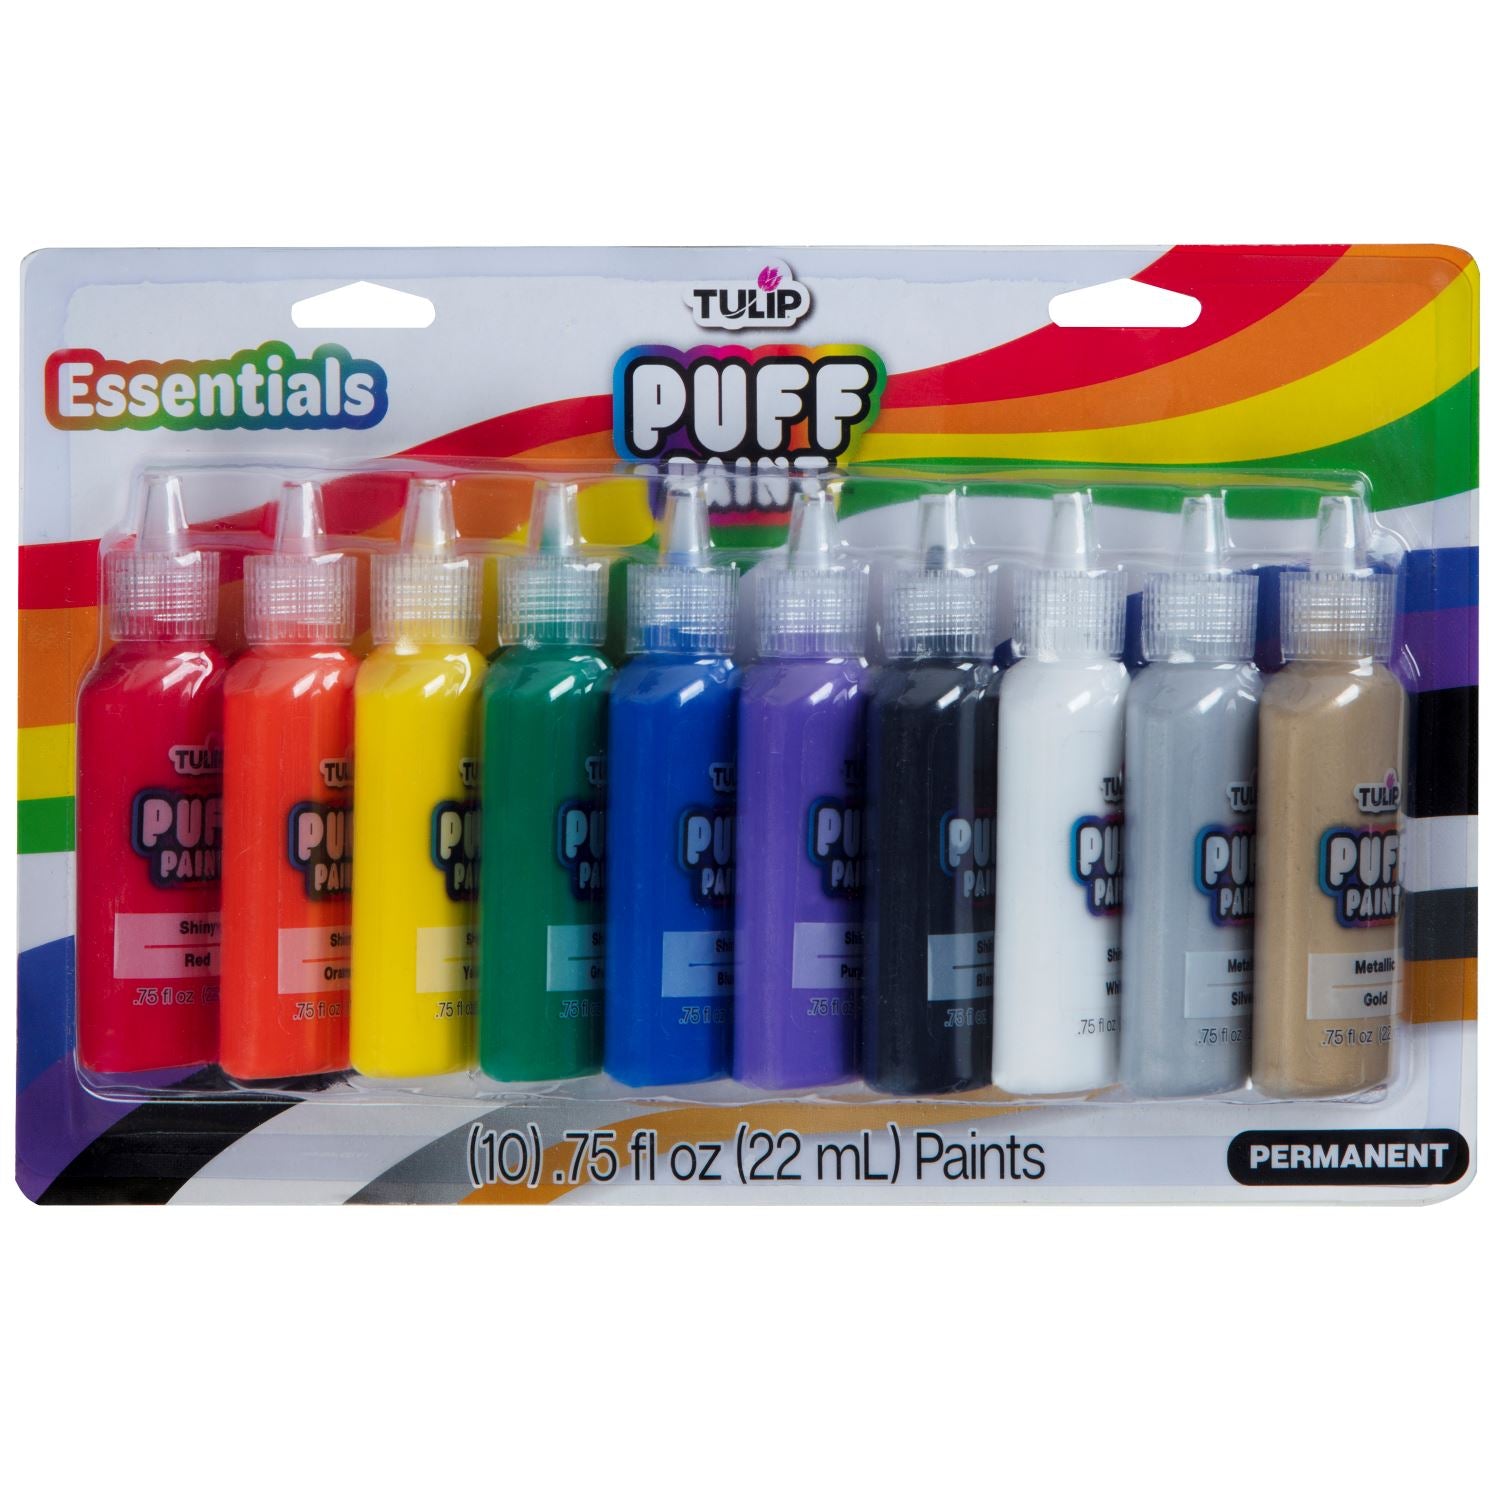 TULIP Puff Paint 20 Pack, Mellow Rainbow, Dimesnional Fabric Paint Party  Pack